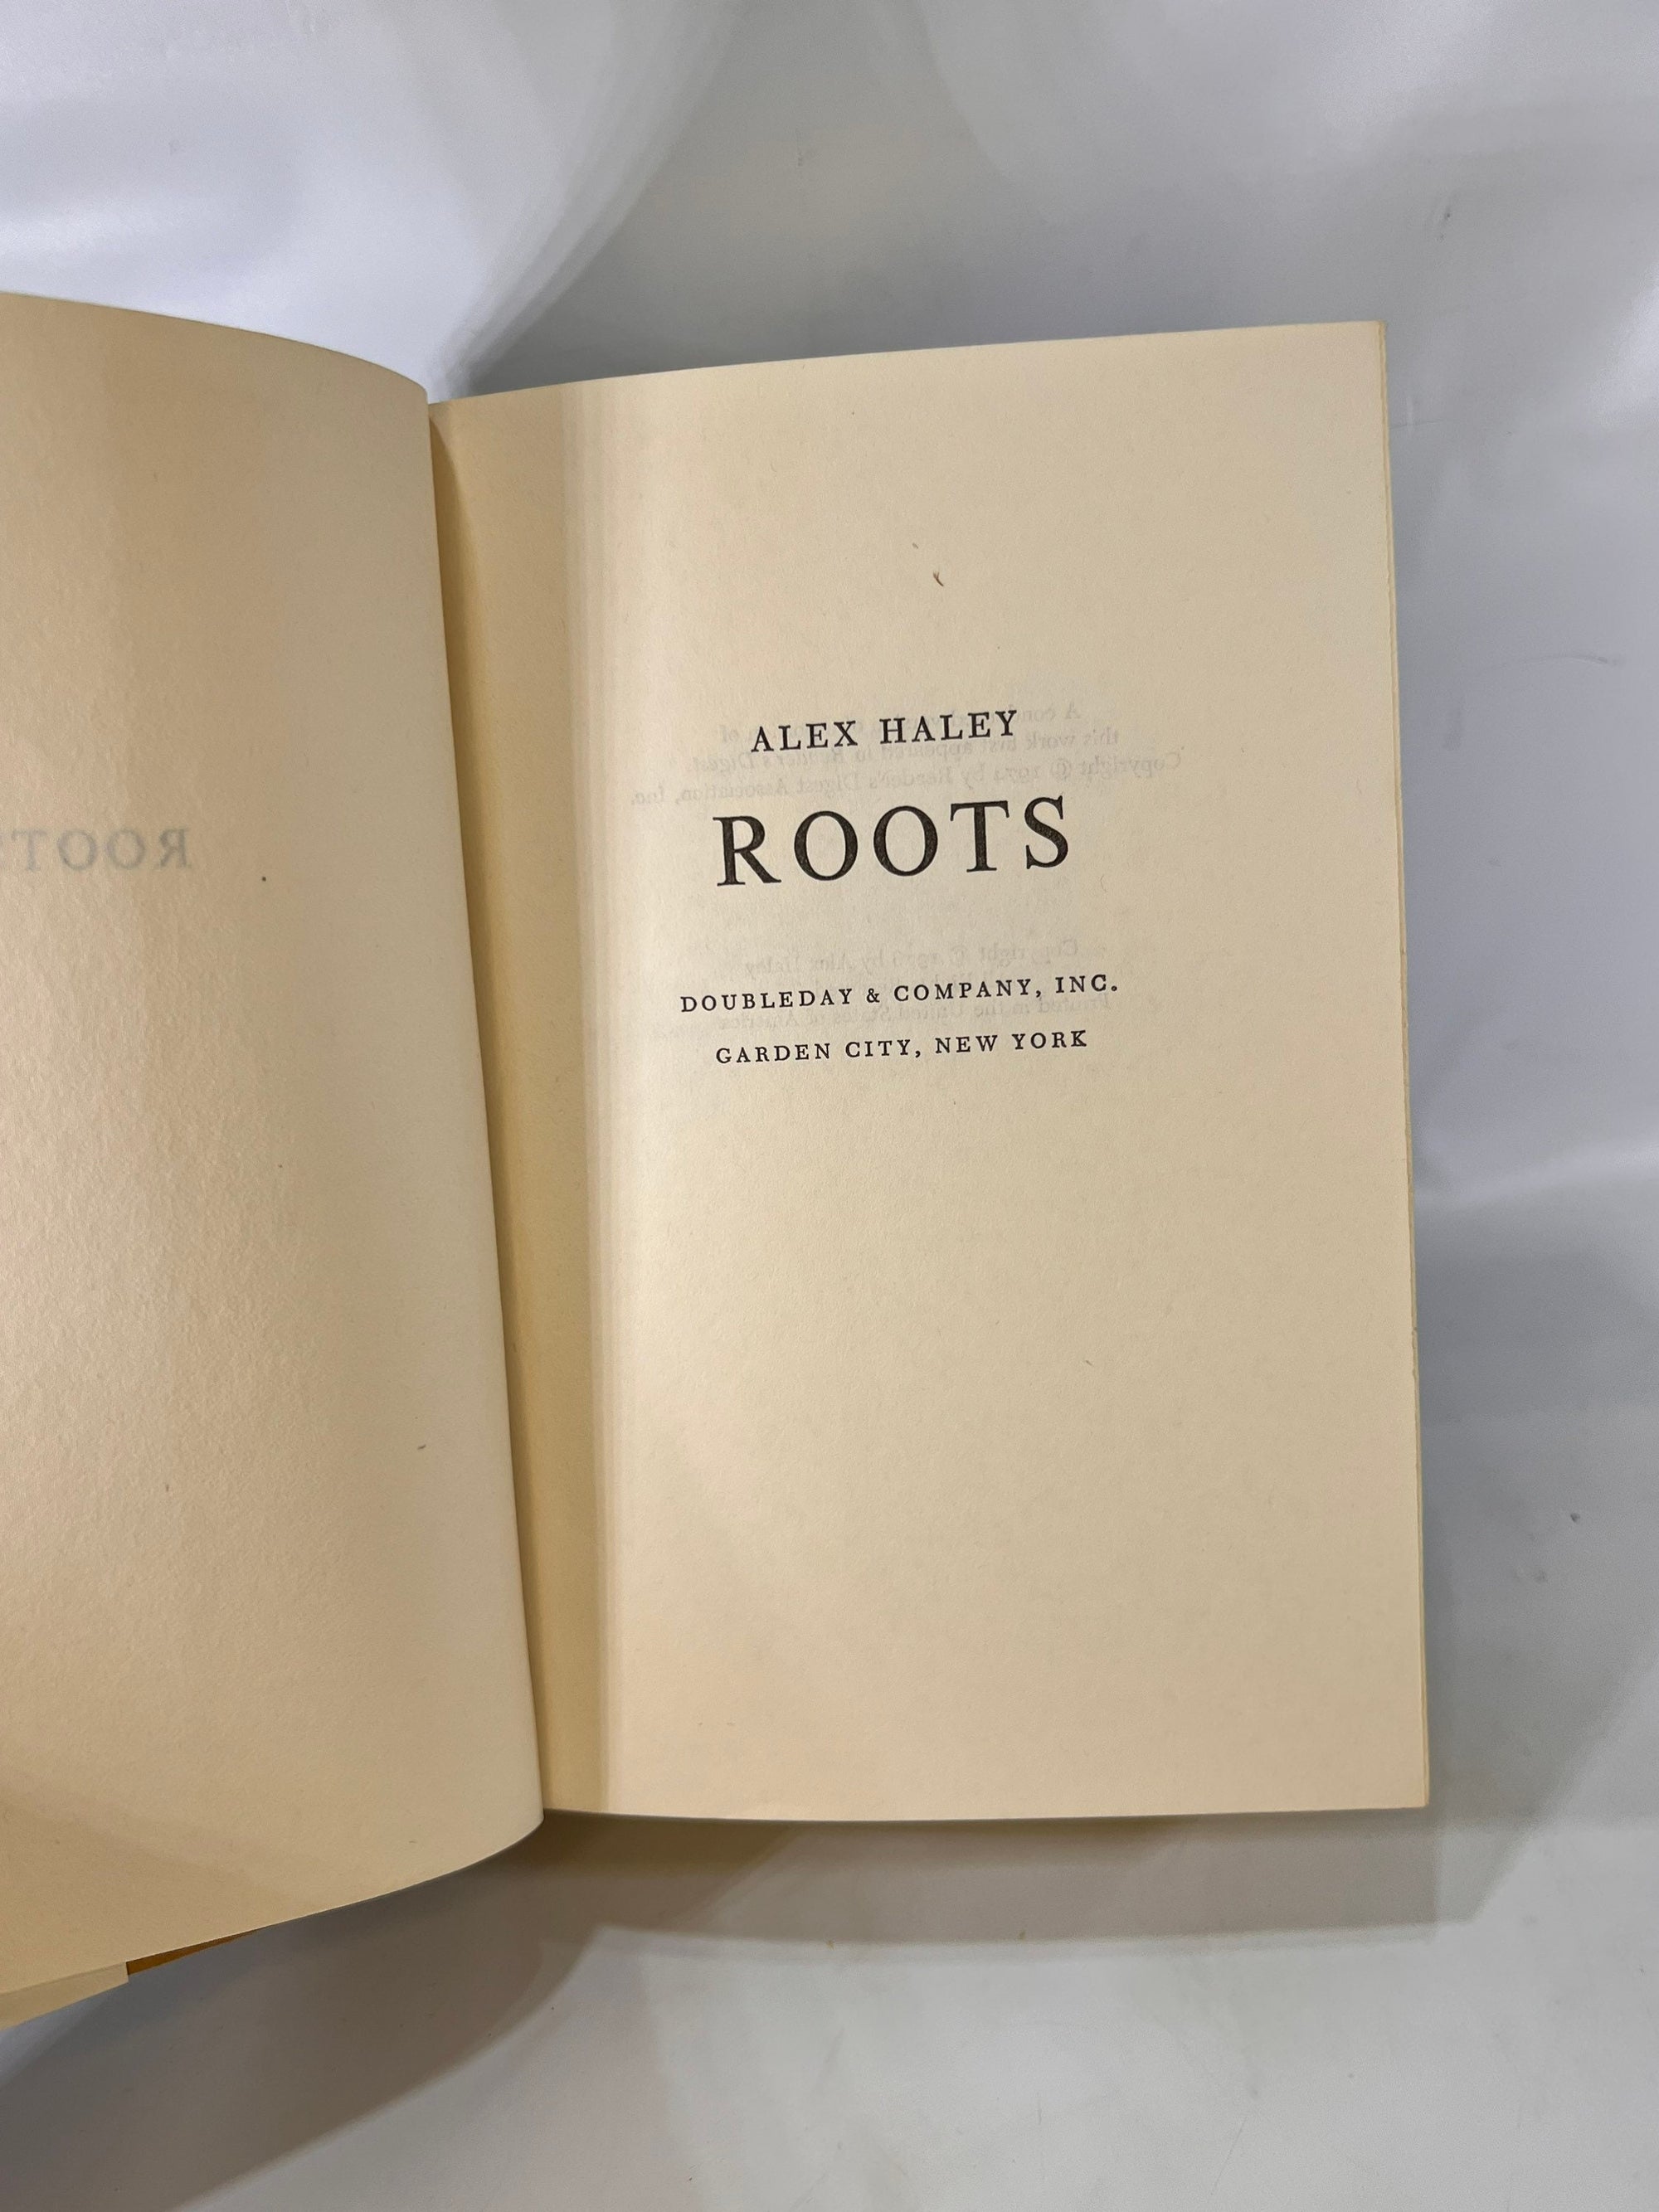 Roots the Saga of an American Family by Alex Haley 1976 Double Day & Company Vintage Book